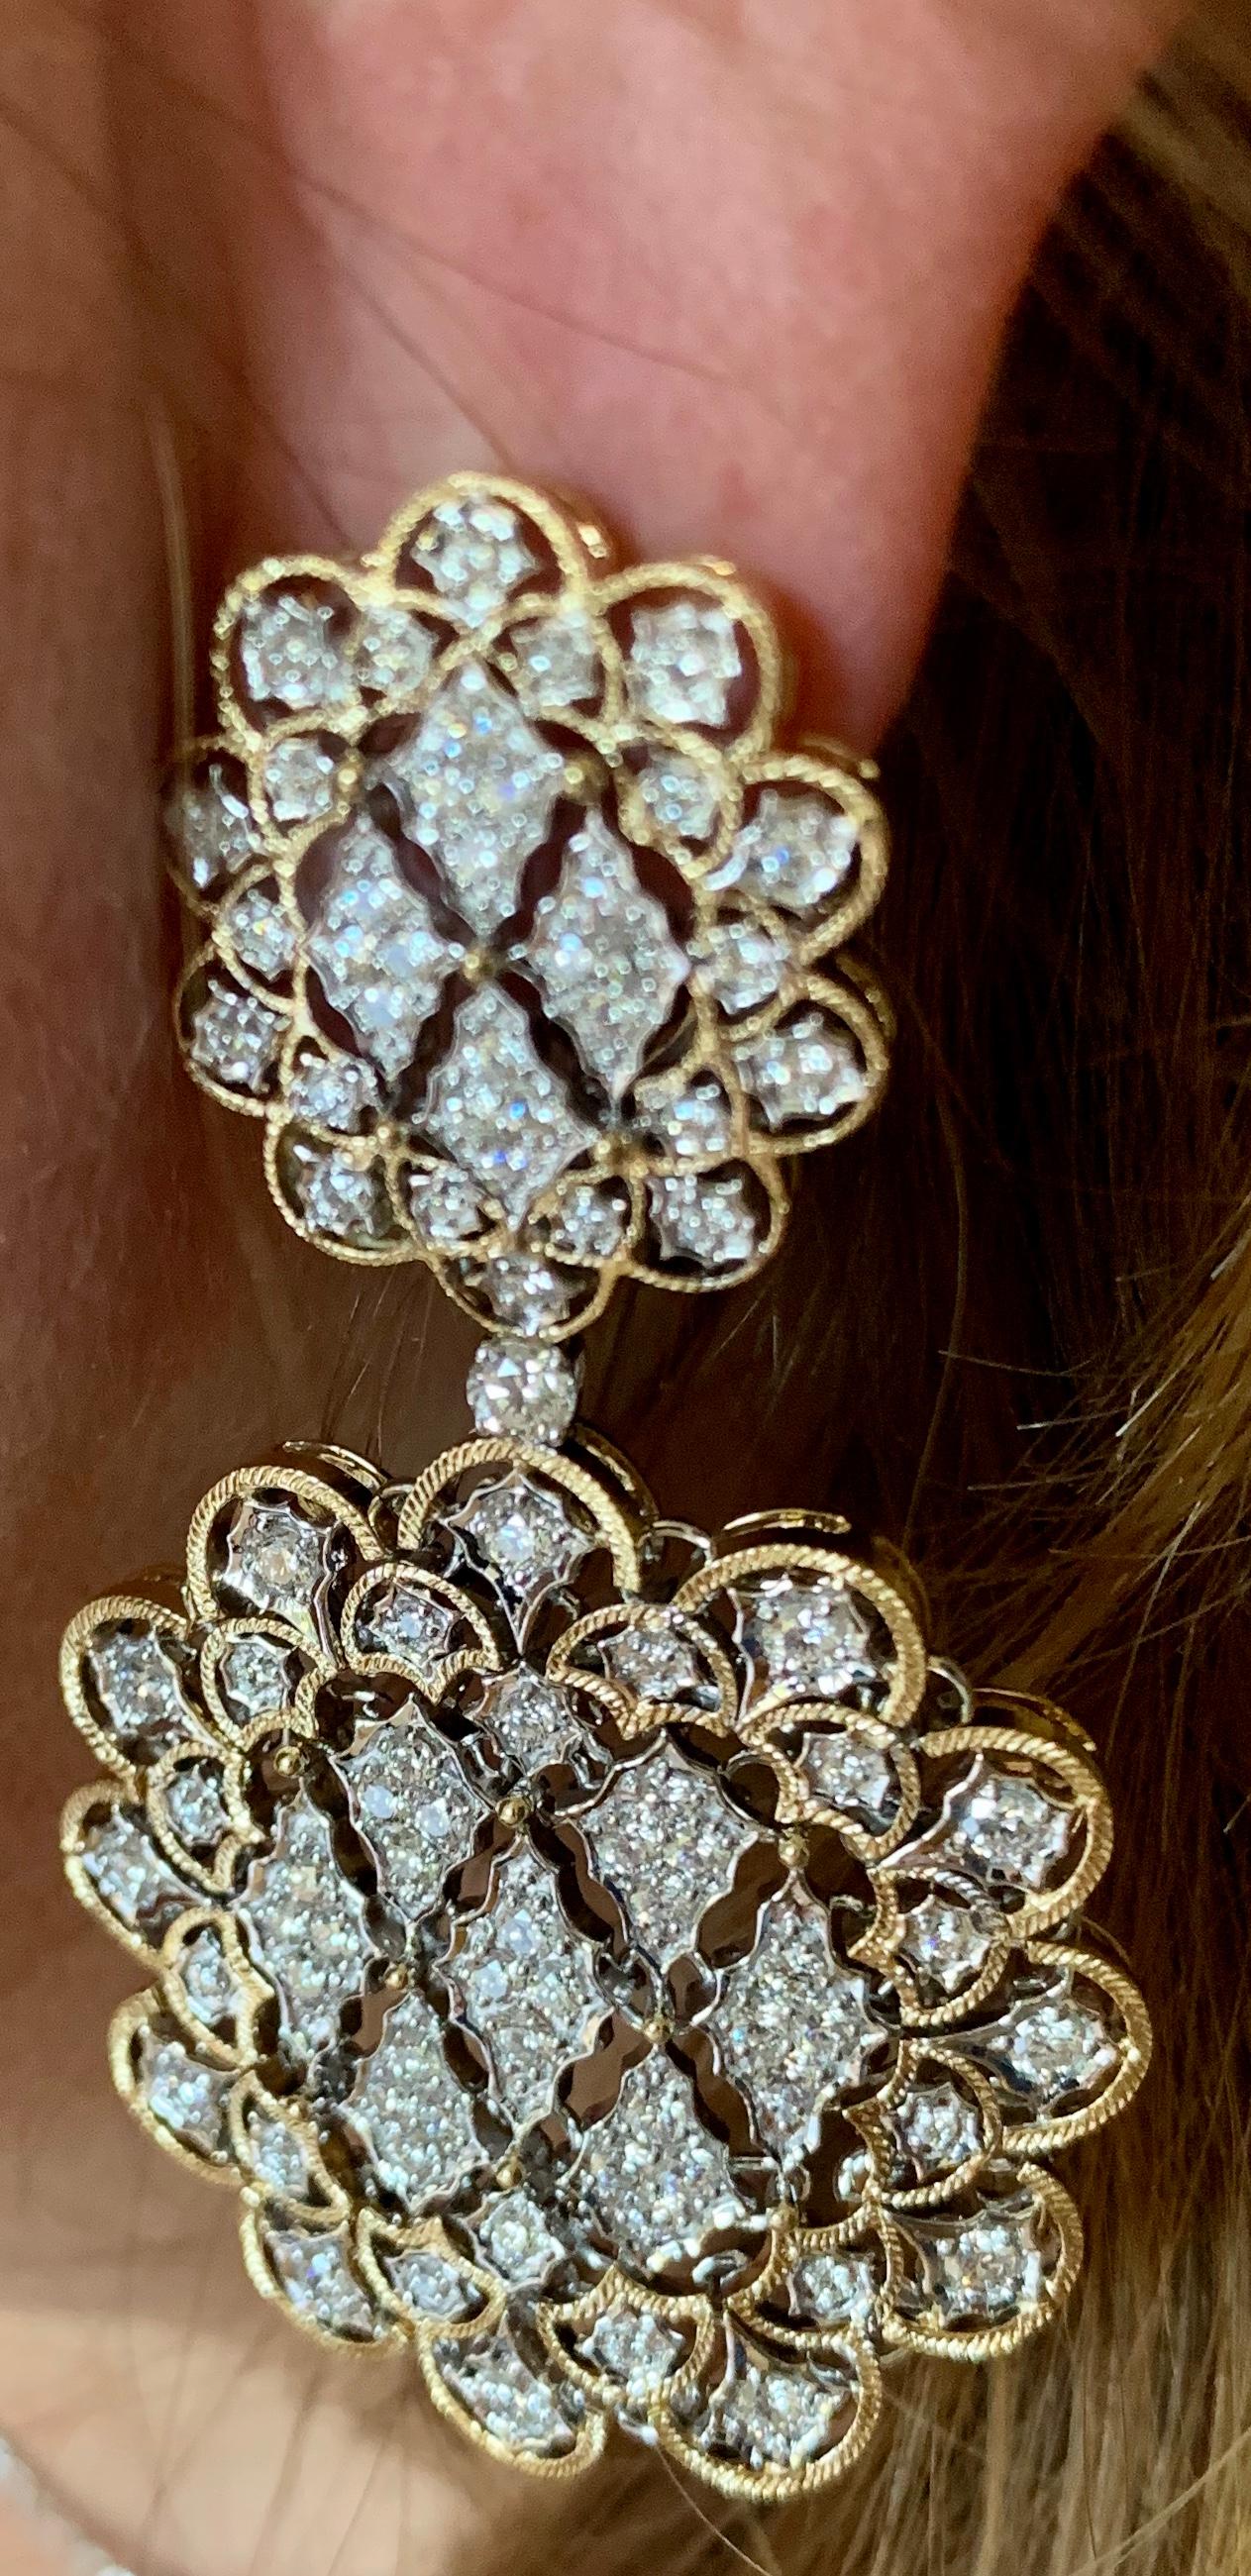 Pair of Glorious 18 Karat White and Yellow Gold Earrings with Diamonds For Sale 2